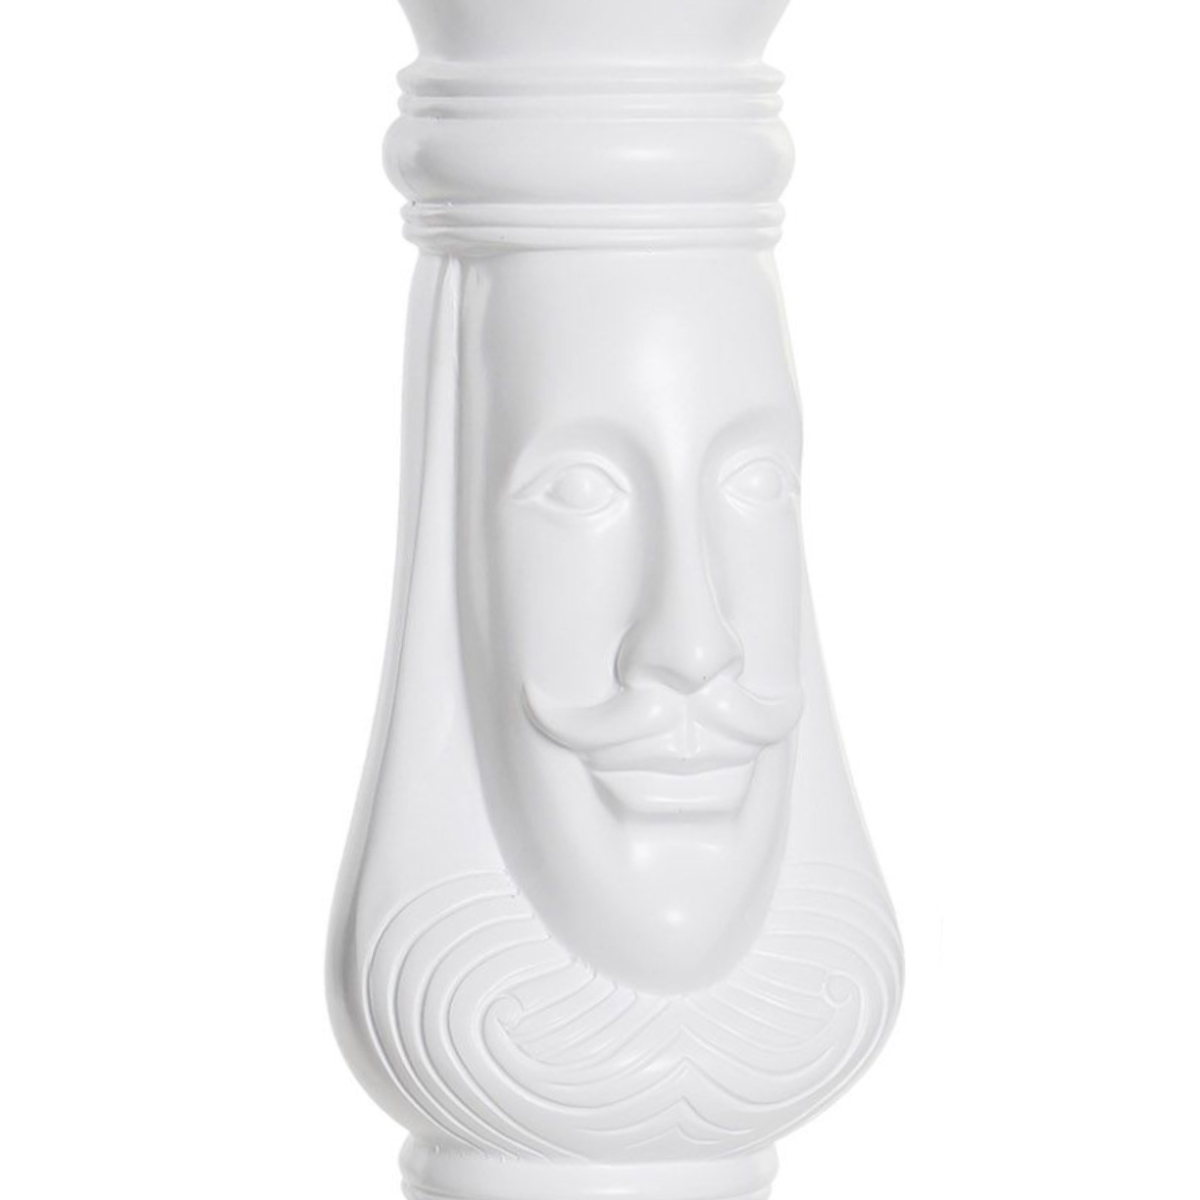 King chess piece figurine in white resin 39 cm